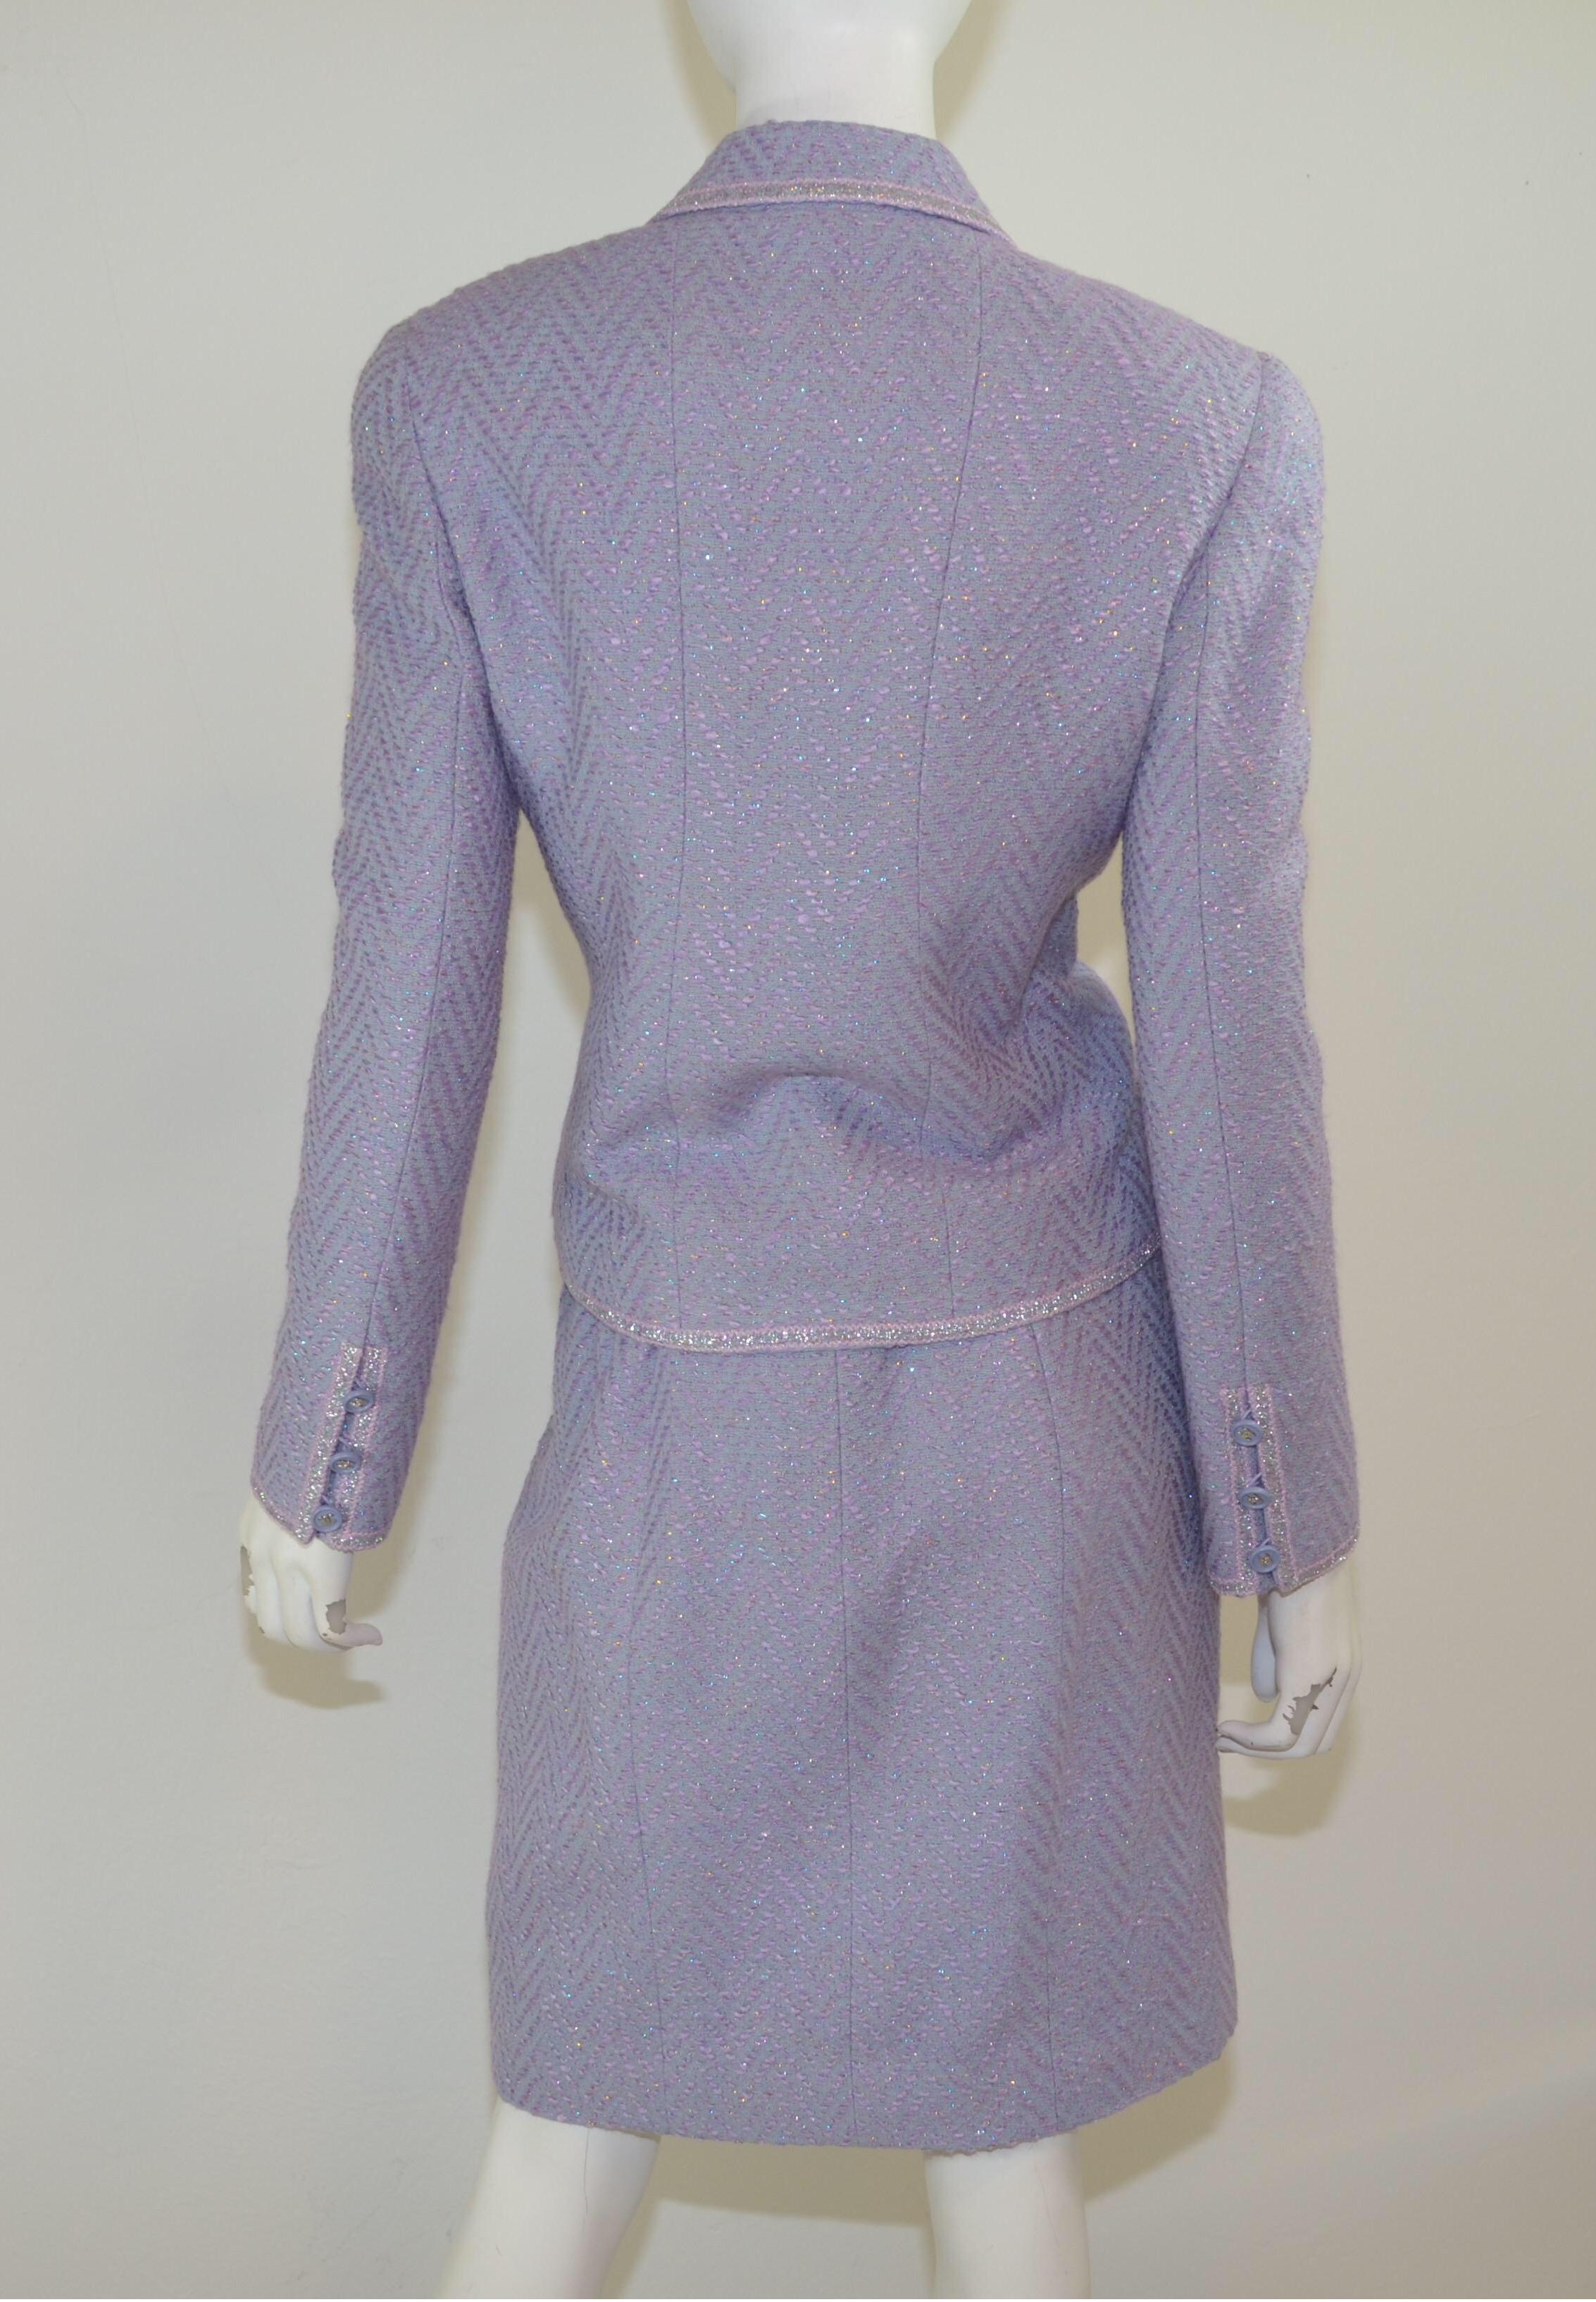 Chanel skirt suit 1997 P in a beautiful purple fantasy Tweed with purple and silvertone button closures on the jacket and a back zipper and hook fastening to the skirt. Skirt suit is labeled a size 44, made in France.

Jacket:
Bust 41”, sleeves 24”,